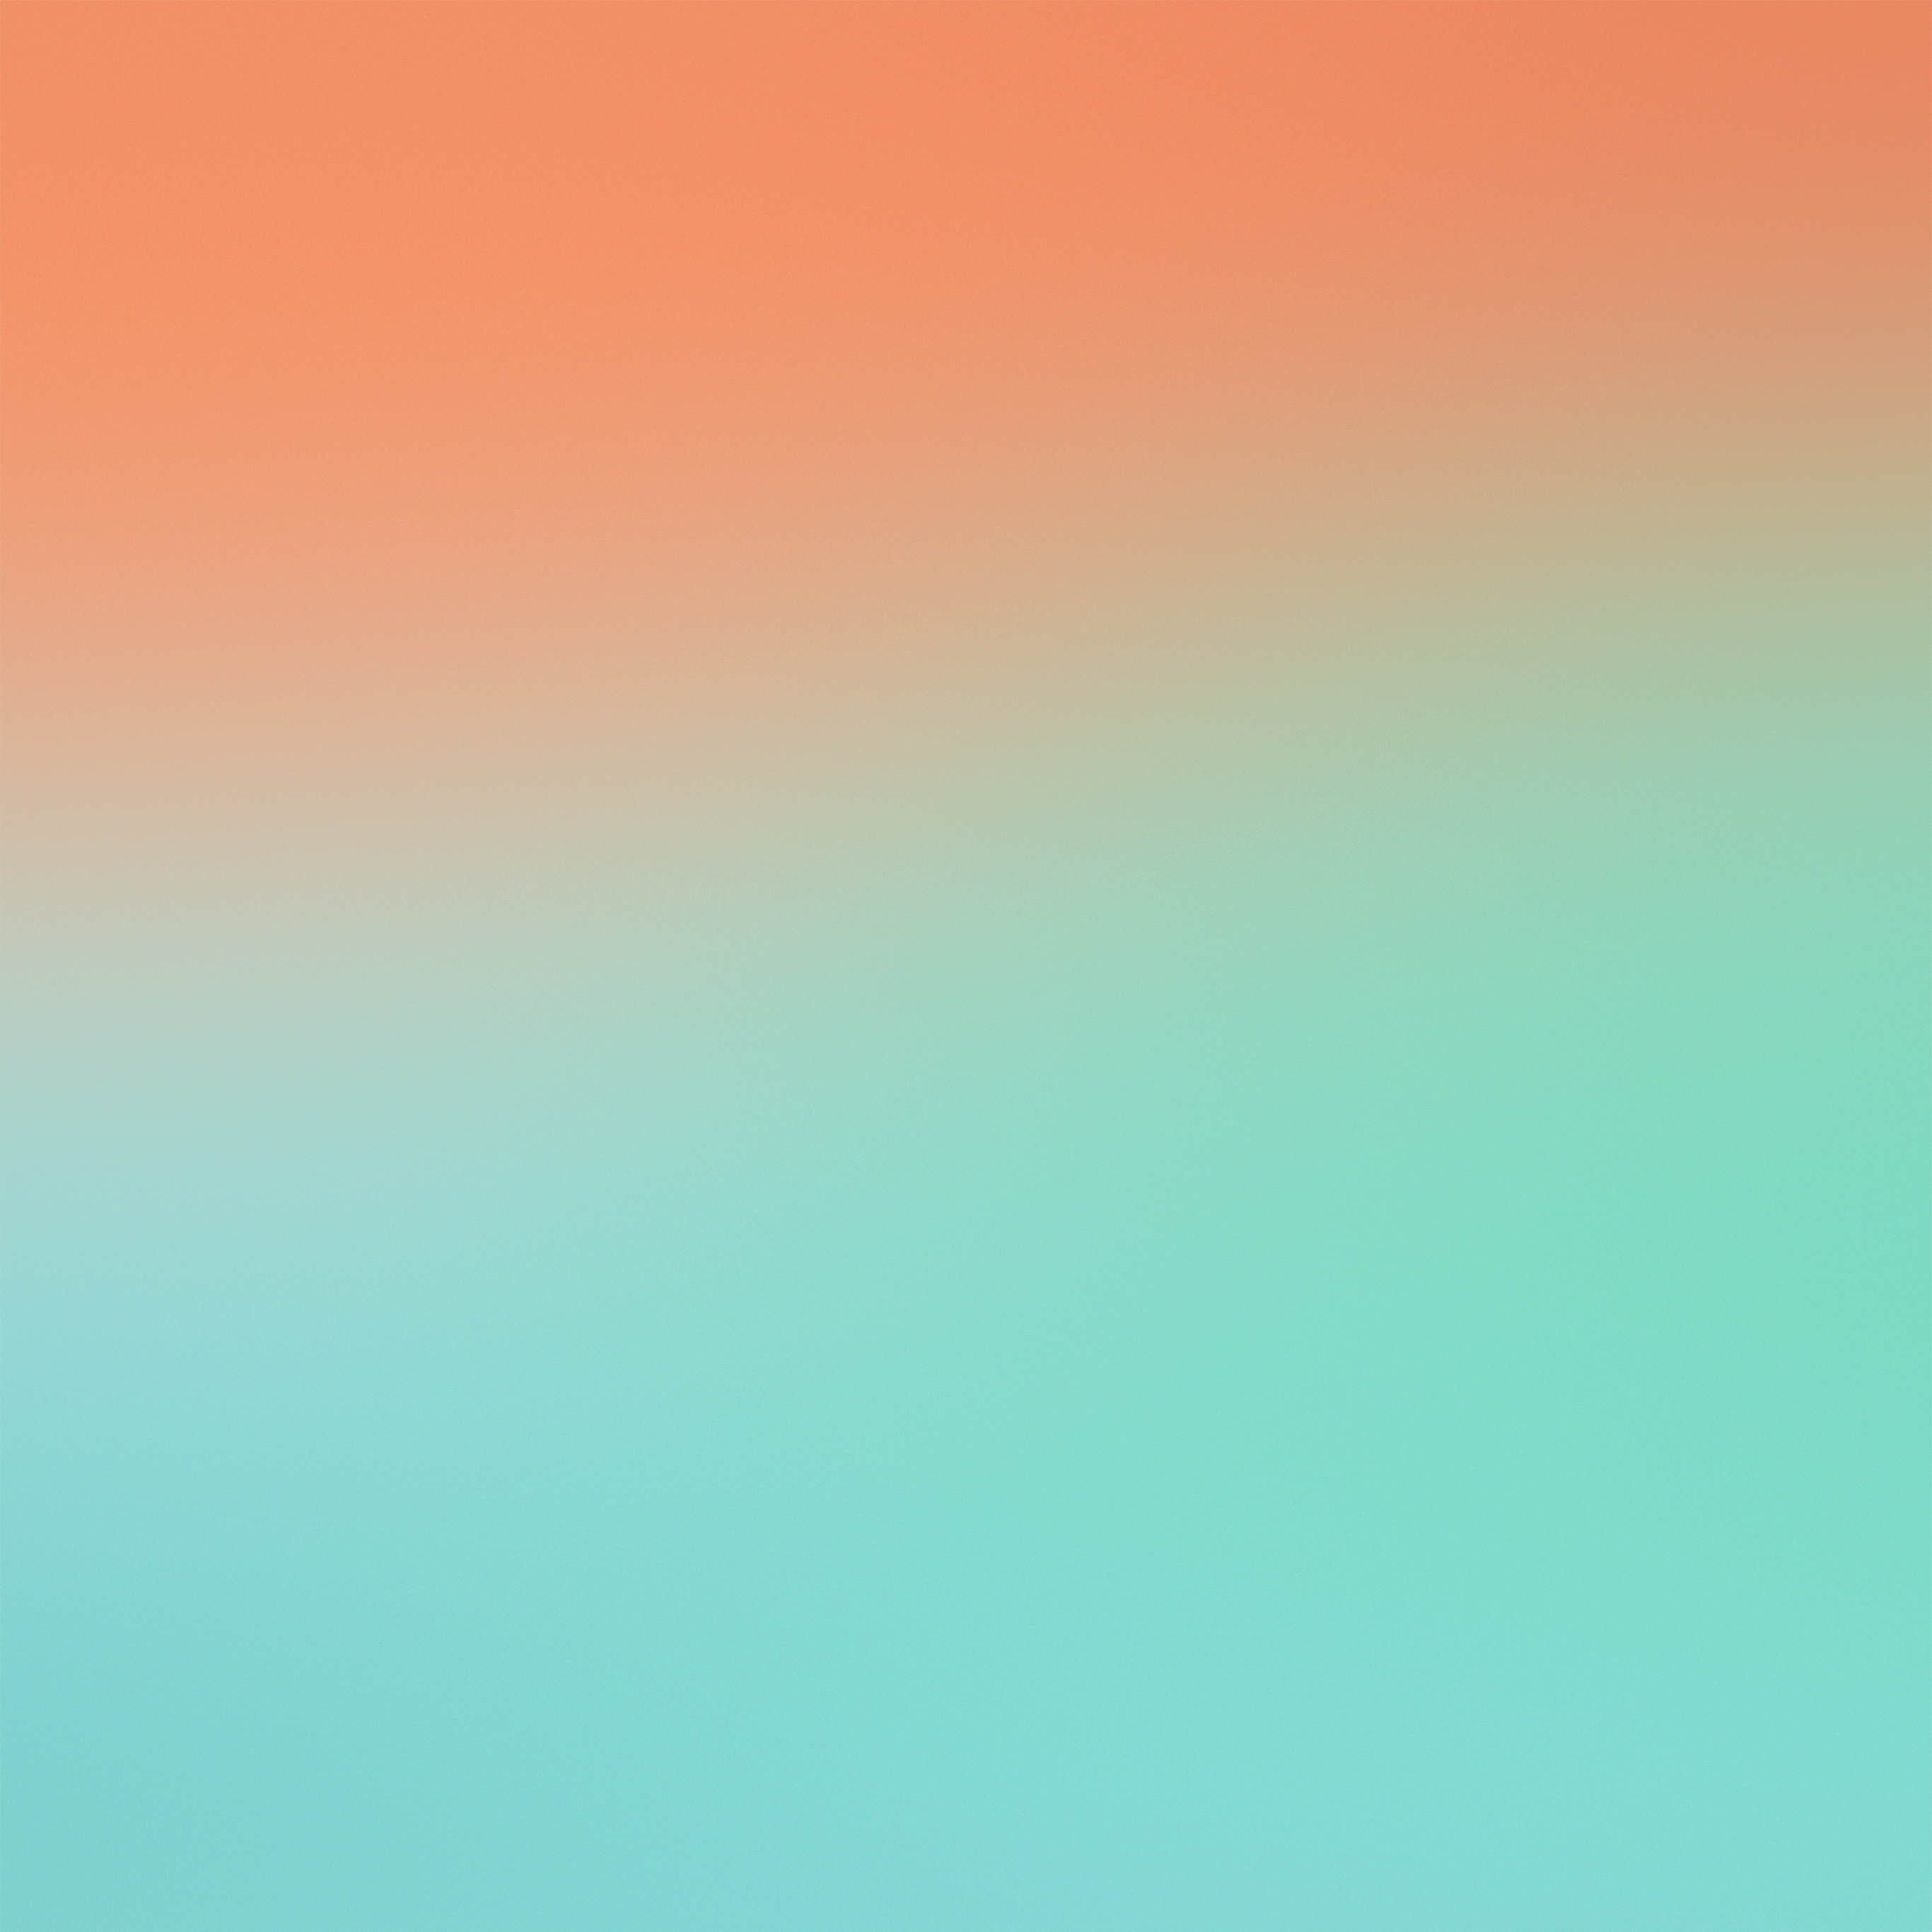 Pastel wallpaper for iPhone and iPad